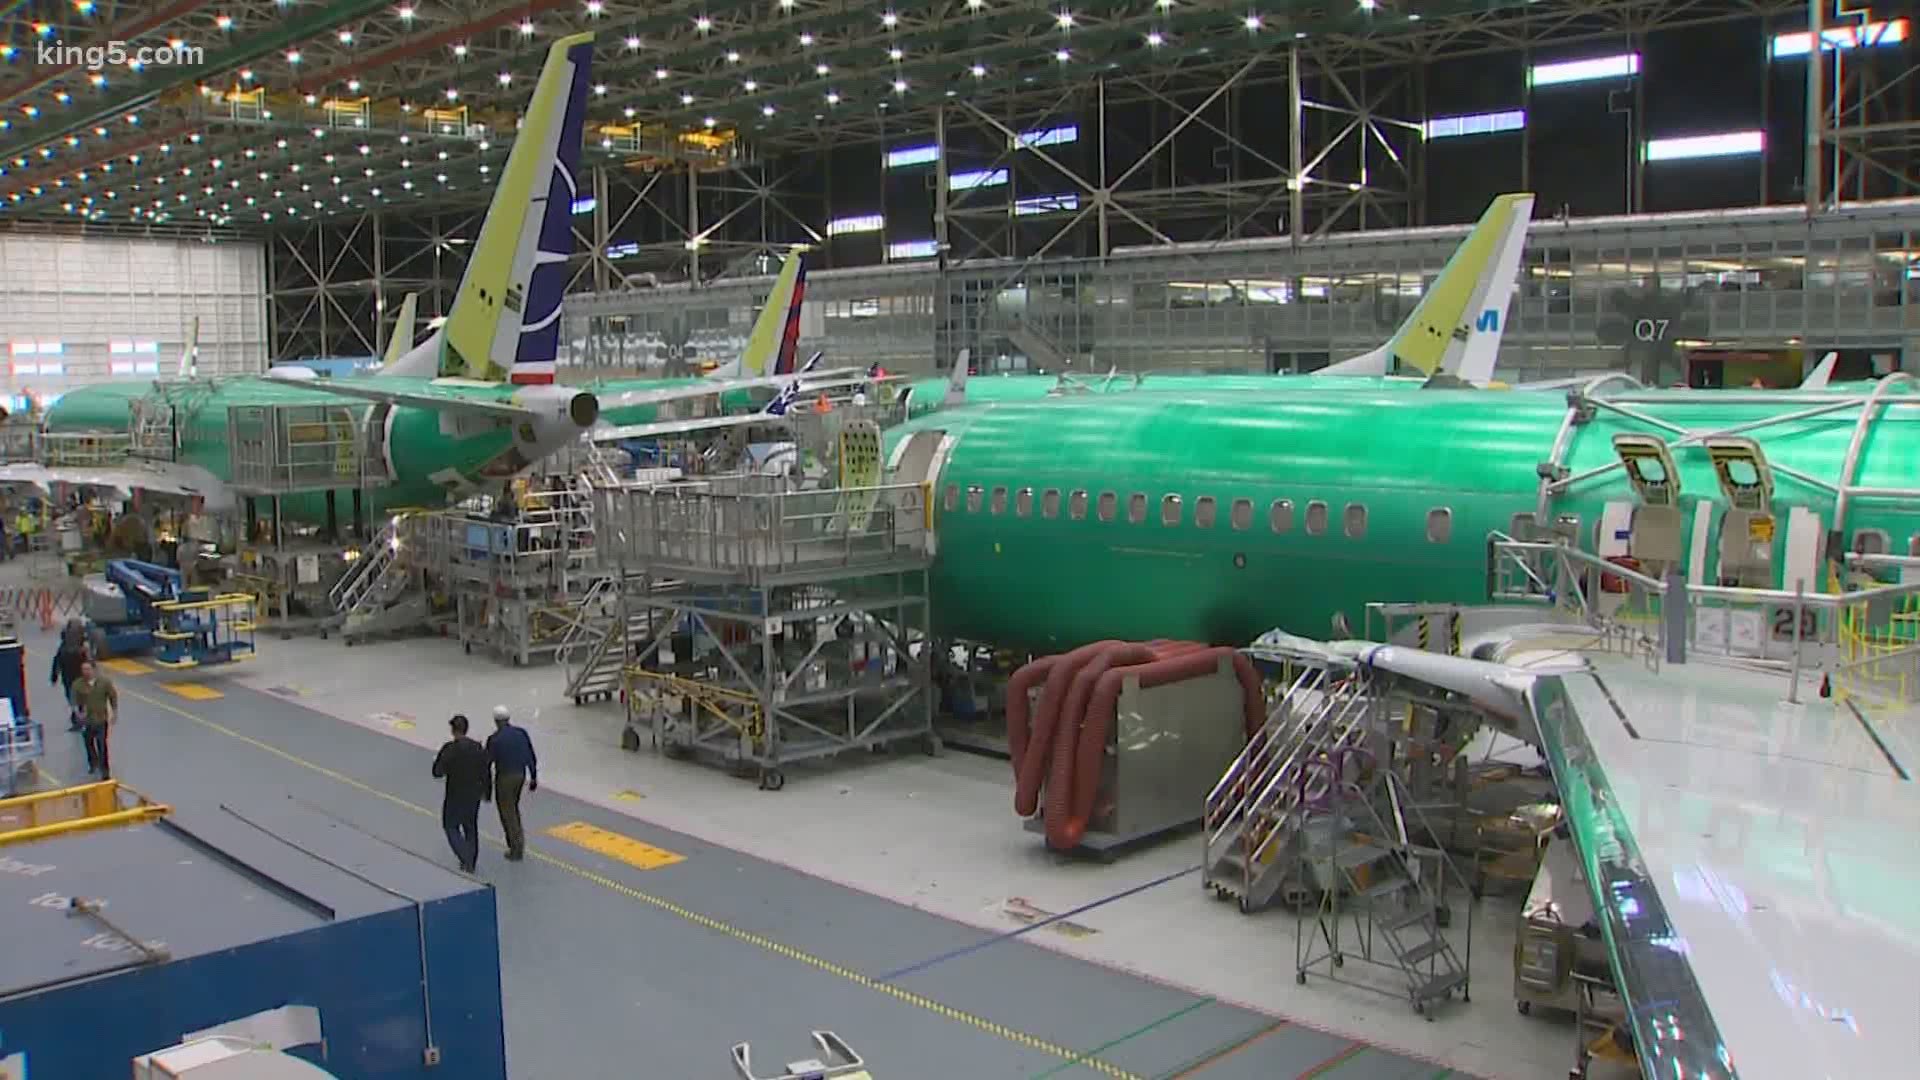 Boeing is cutting about 10% of its workforce and slowing production of planes to deal with a downturn in business.